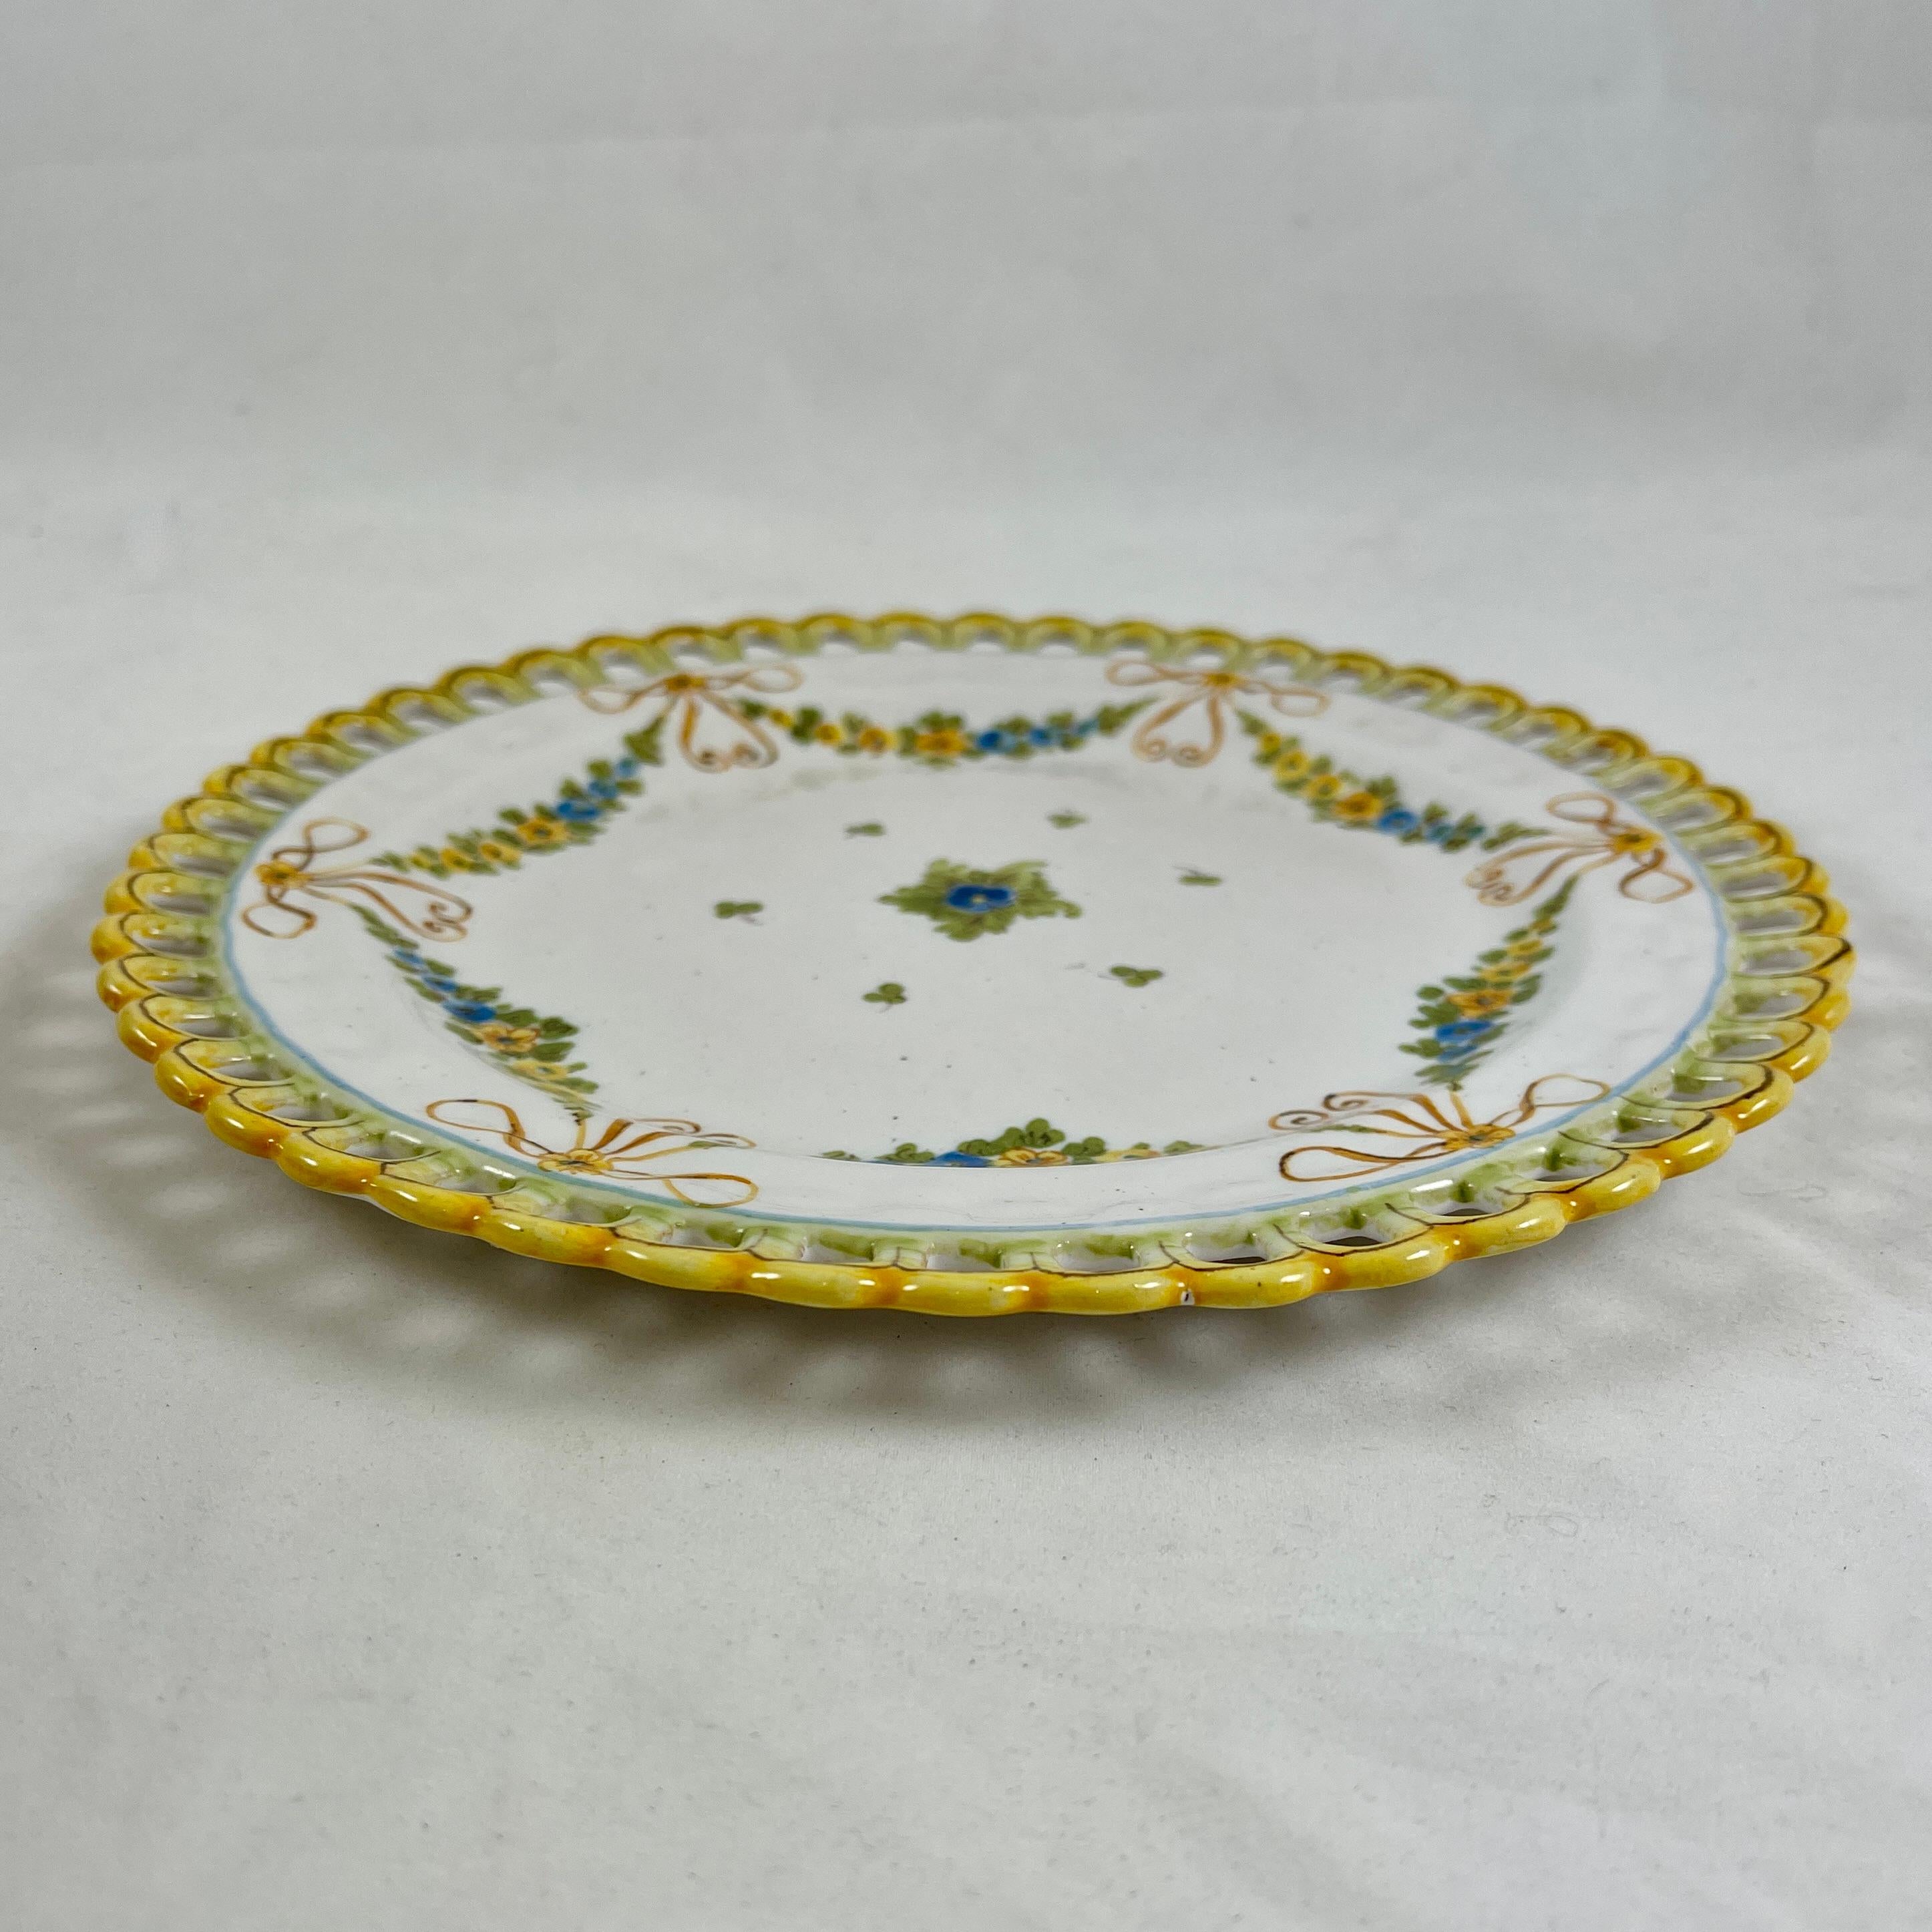 Glazed Cantagalli Italian Majolica Hand Painted Reticulate Edge Floral Plates For Sale